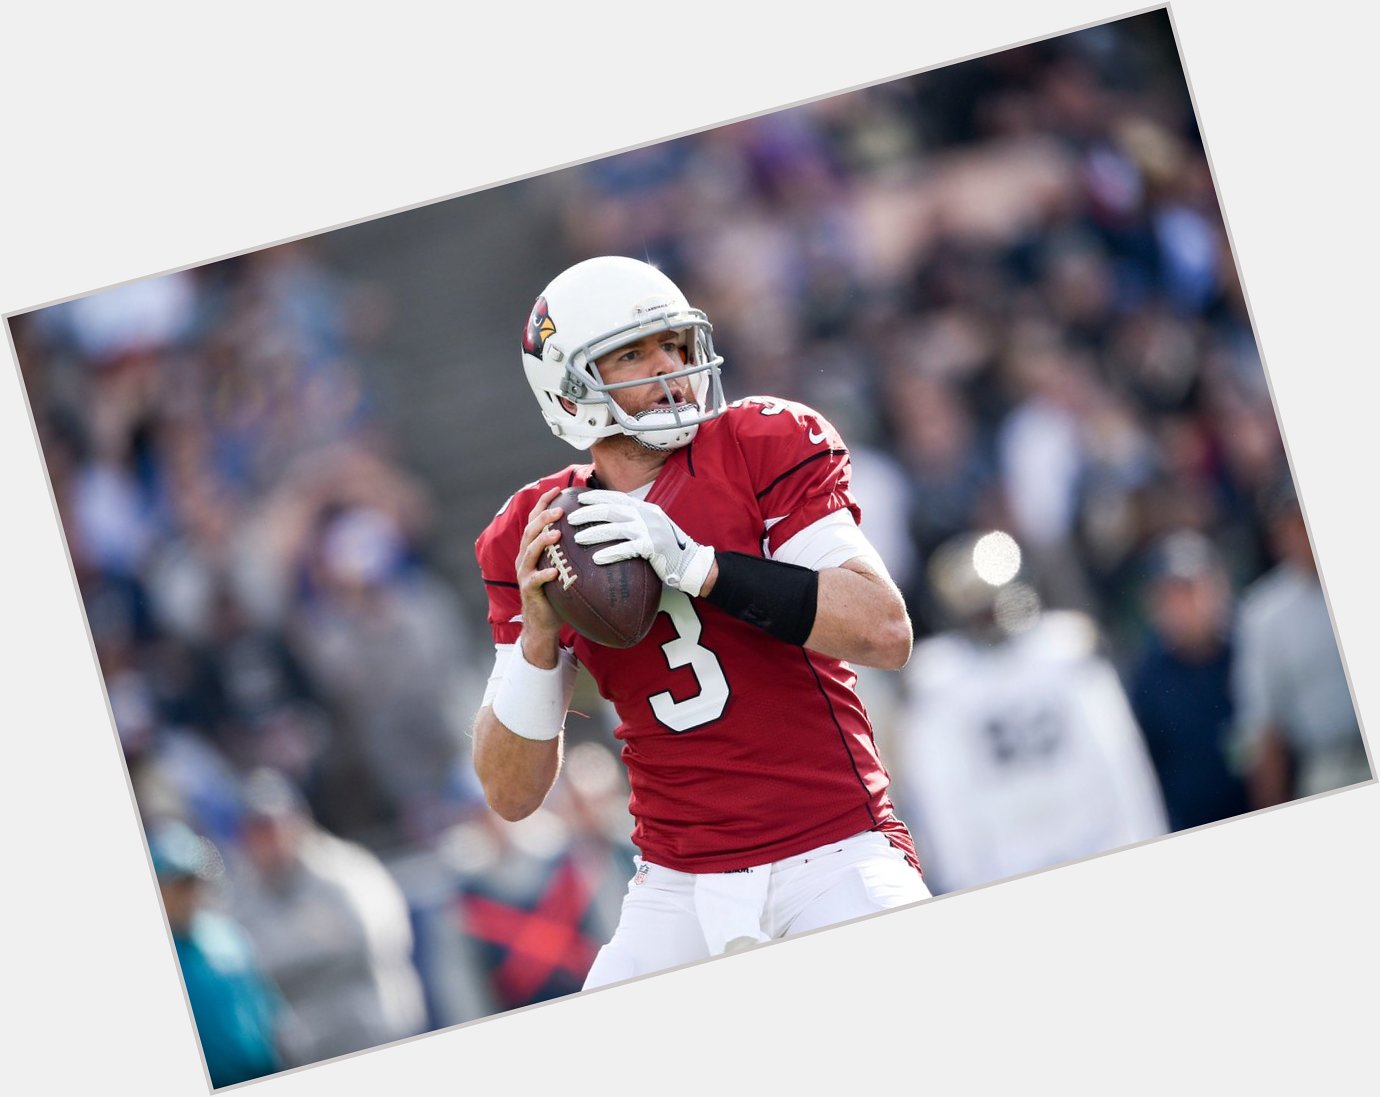 Happy Birthday to Carson Palmer, who turns 38 today! 